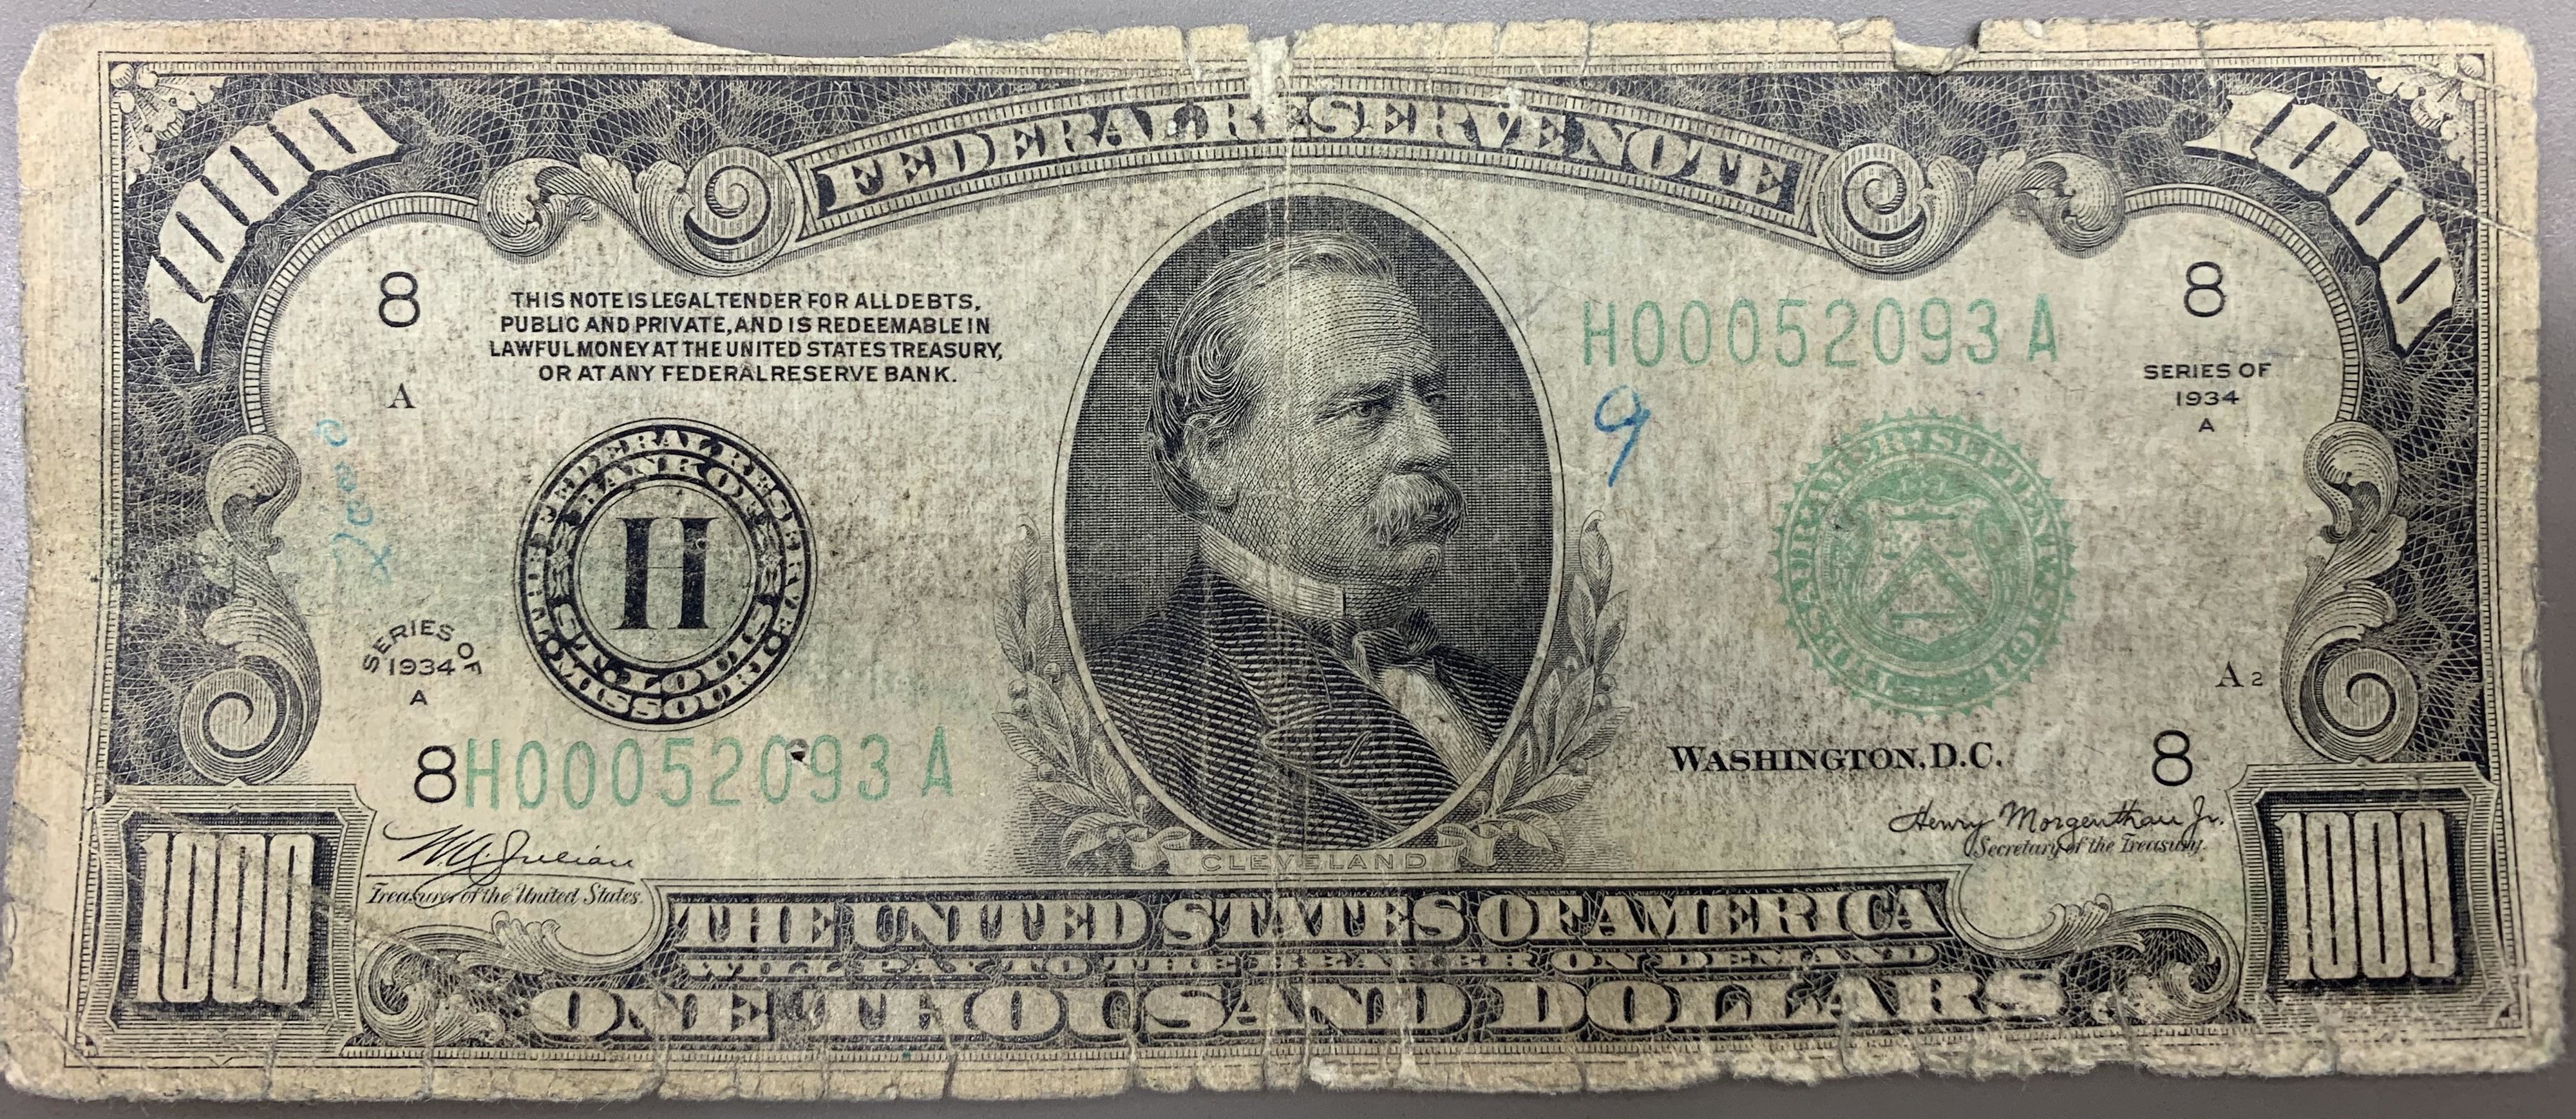 $1,000 bill from 1934 with Grover Cleveland on the front